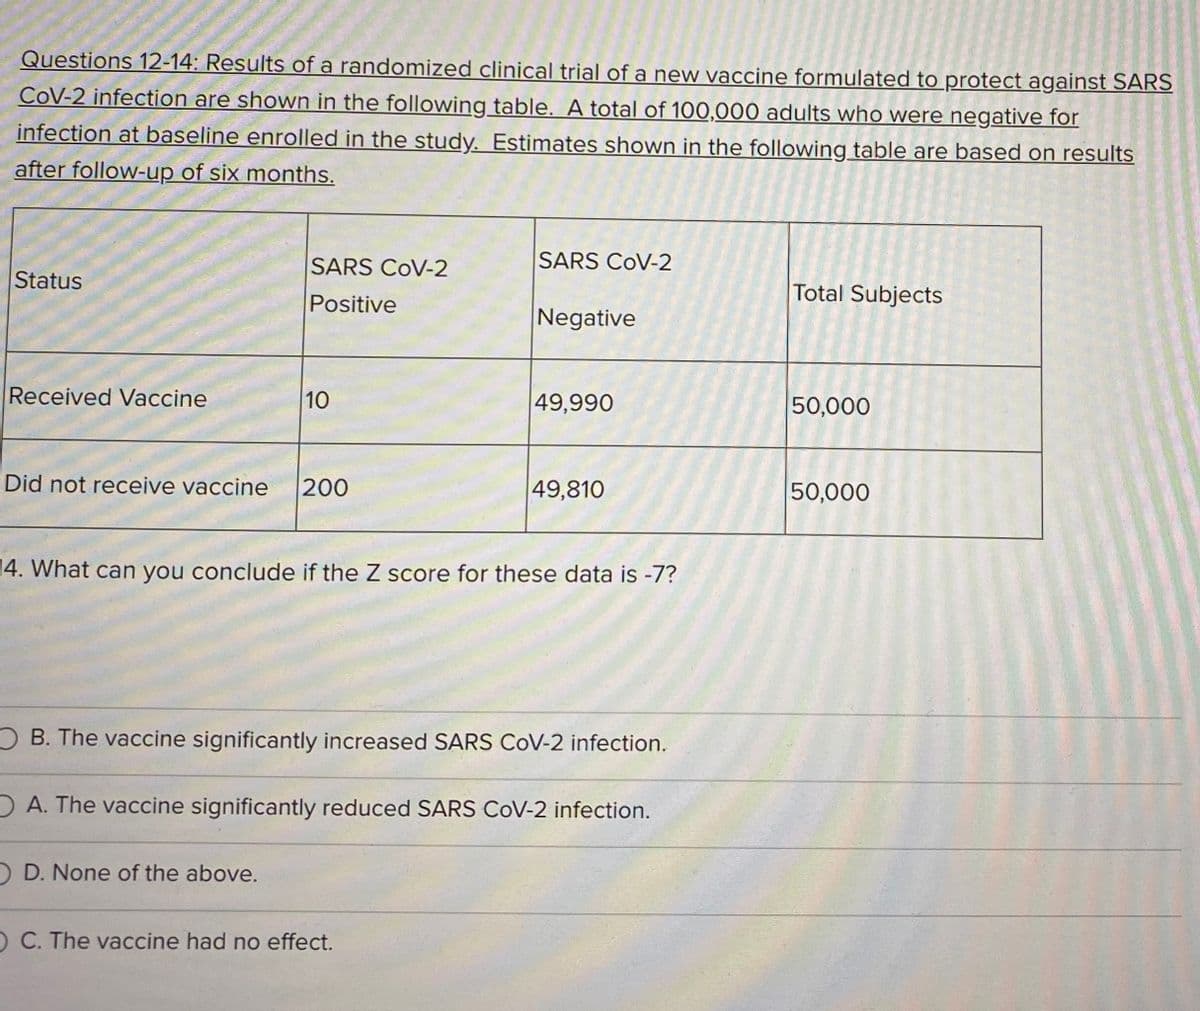 Questions 12-14: Results of a randomized clinical trial of a new vaccine formulated to protect against SARS
CoV-2 infection are shown in the following table. A total of 100,000 adults who were negative for
infection at baseline enrolled in the study. Estimates shown in the following table are based on results
after follow-up of six months.
SARS COV-2
SARS CoV-2
Status
Total Subjects
Positive
Negative
Received Vaccine
10
49,990
50,000
Did not receive vaccine
200
49,810
50,000
14. What can you conclude if the Z score for these data is -7?
B. The vaccine significantly increased SARS CoV-2 infection.
DA. The vaccine significantly reduced SARS CoV-2 infection.
O D. None of the above.
O C. The vaccine had no effect.
